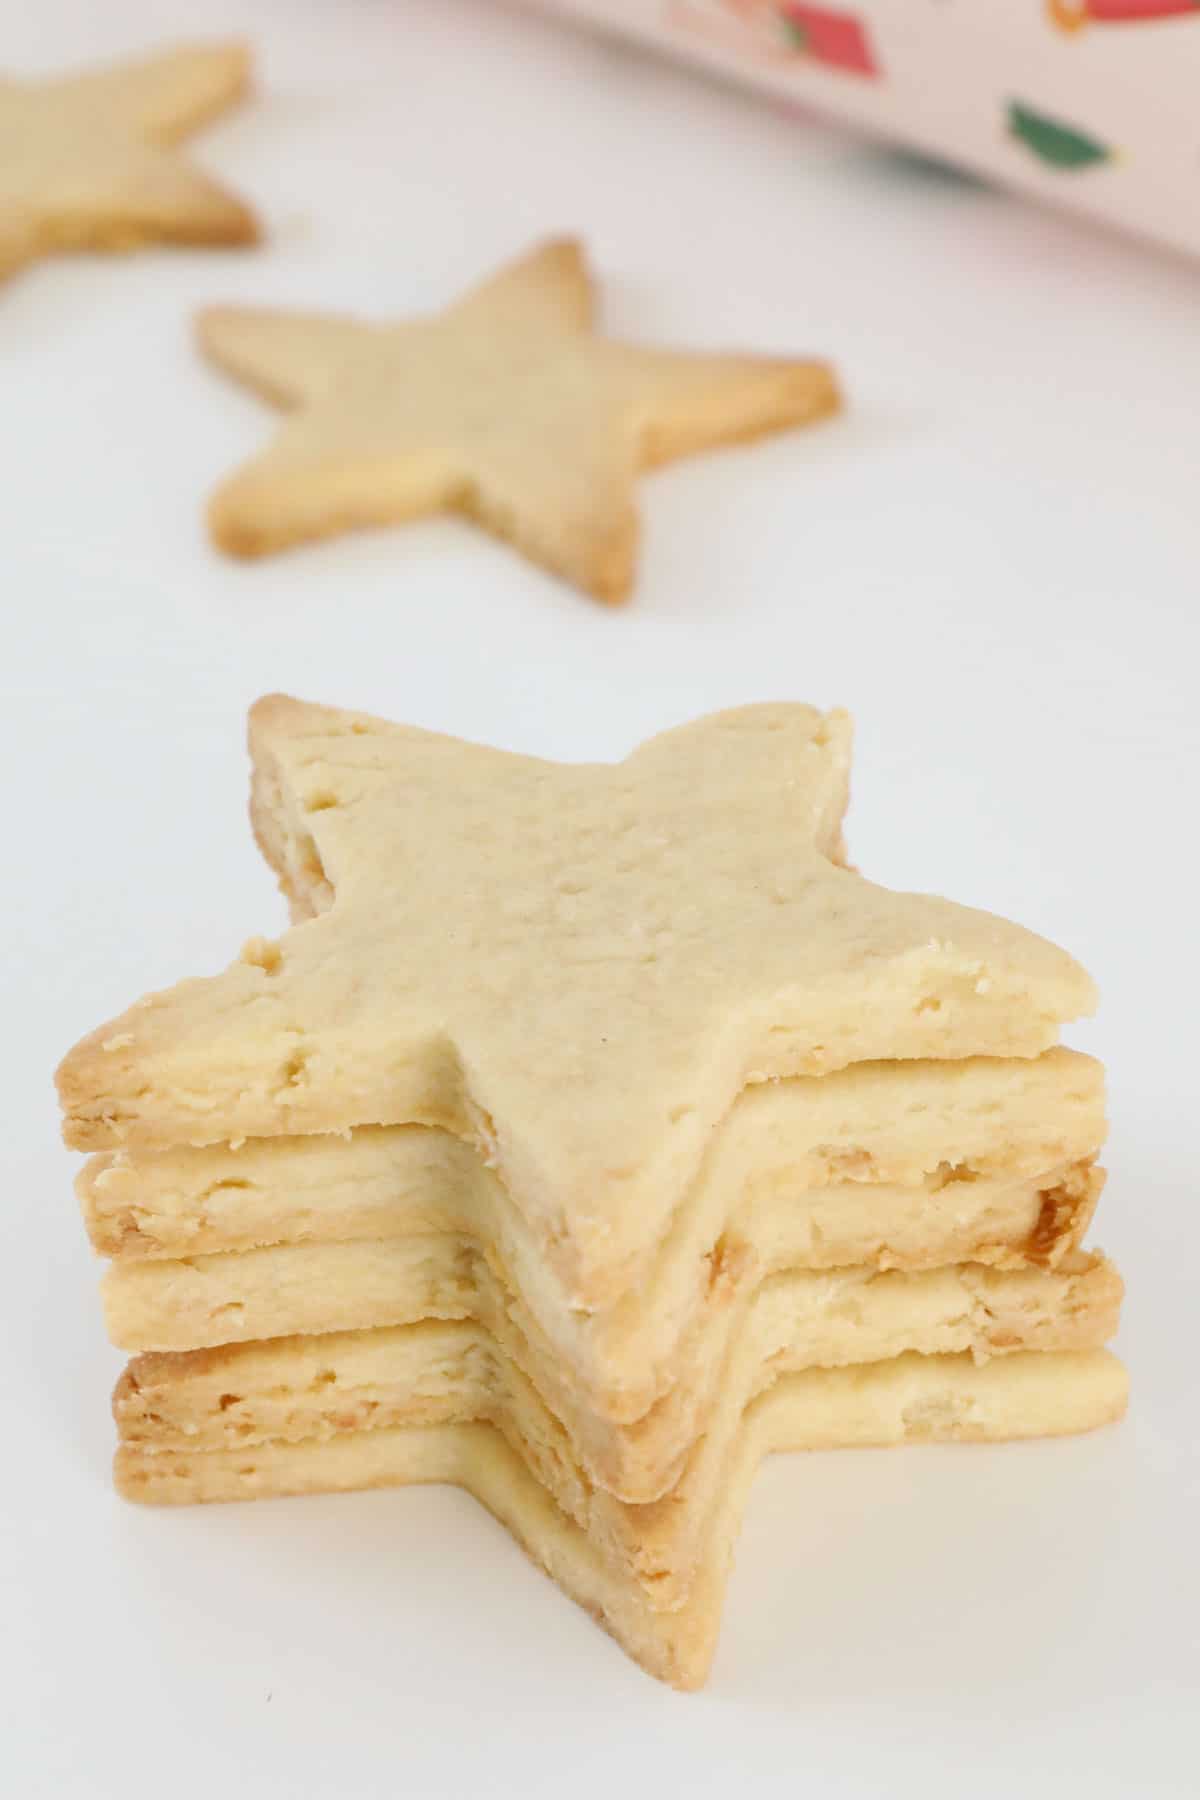 A stack of star shaped shortbread cookies.